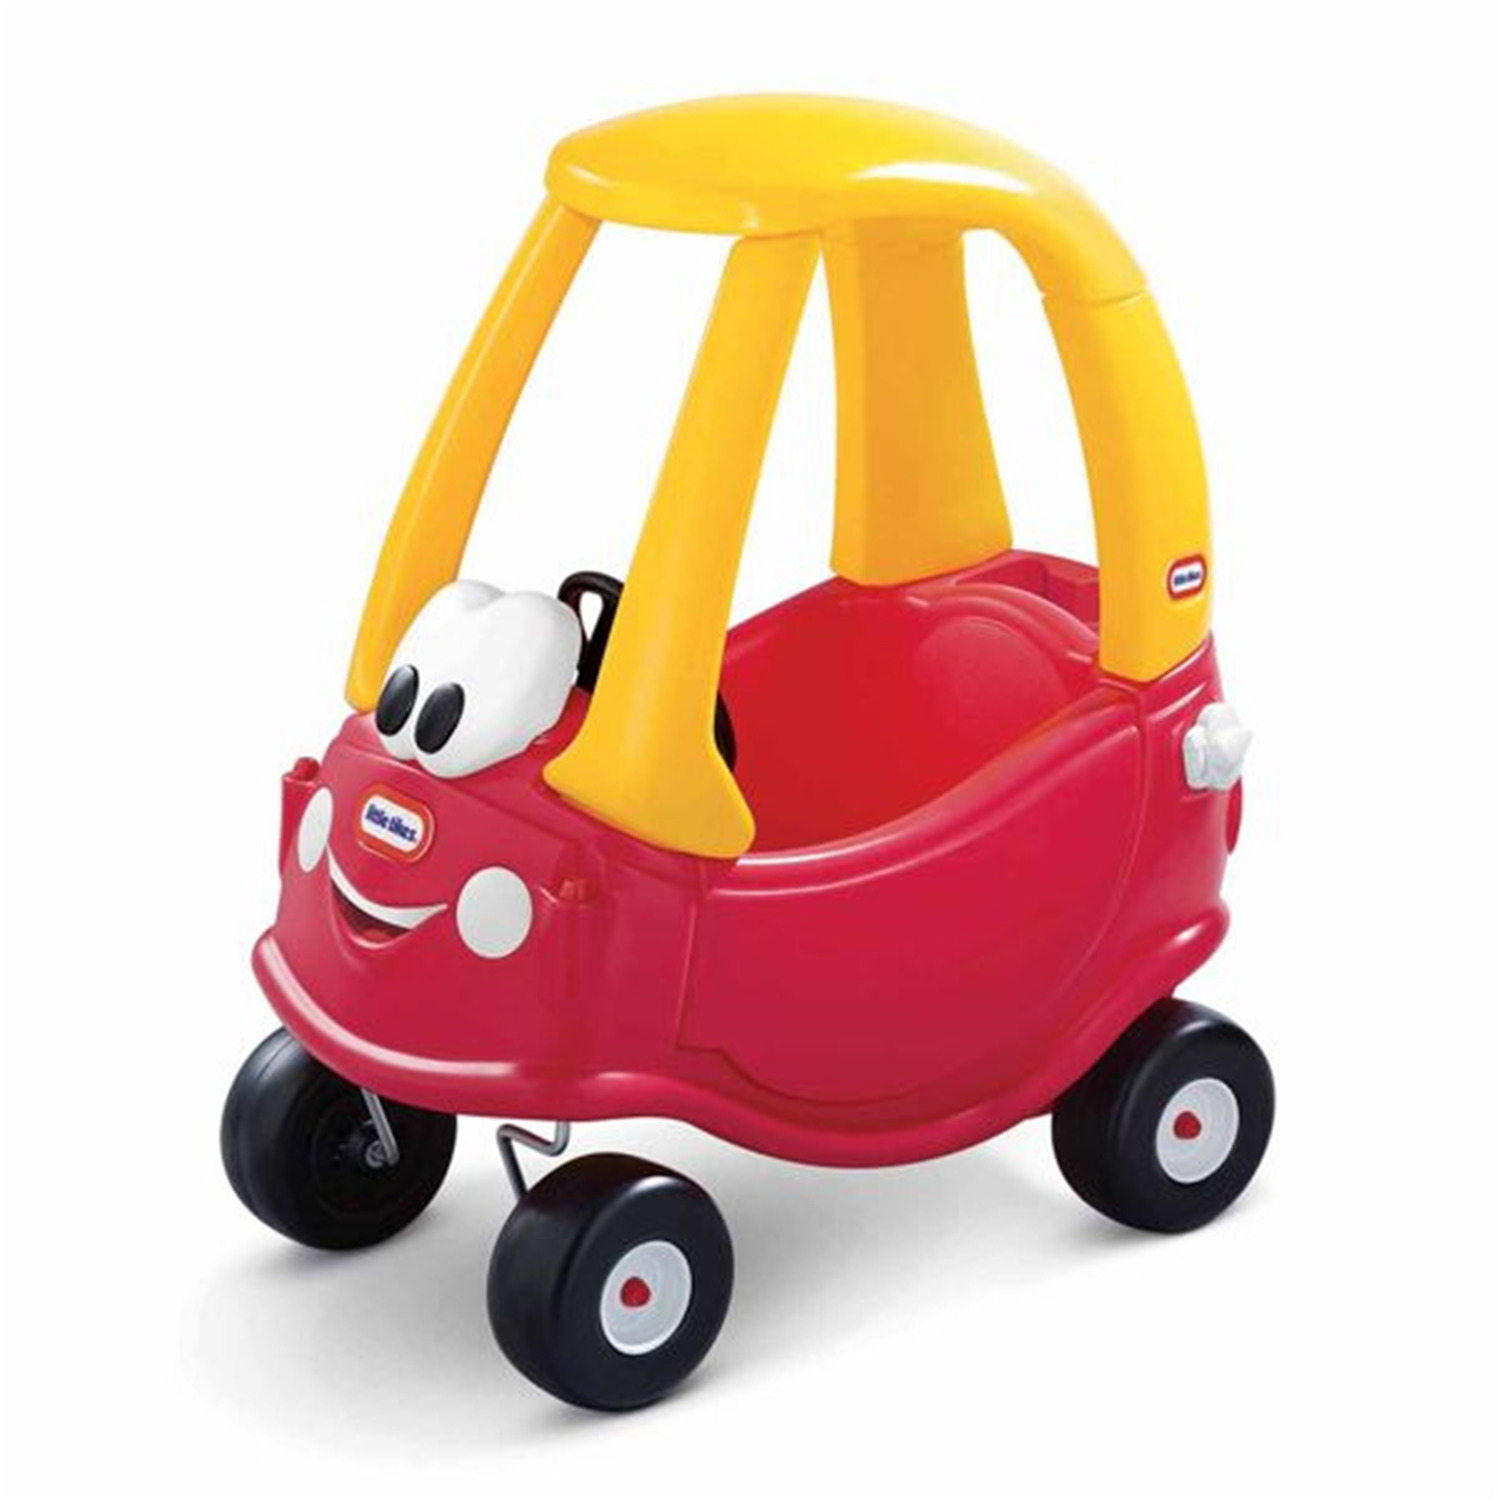 Little Tikes Cozy Coupe 30th Anniversary Edition Ride on - image 5 of 11